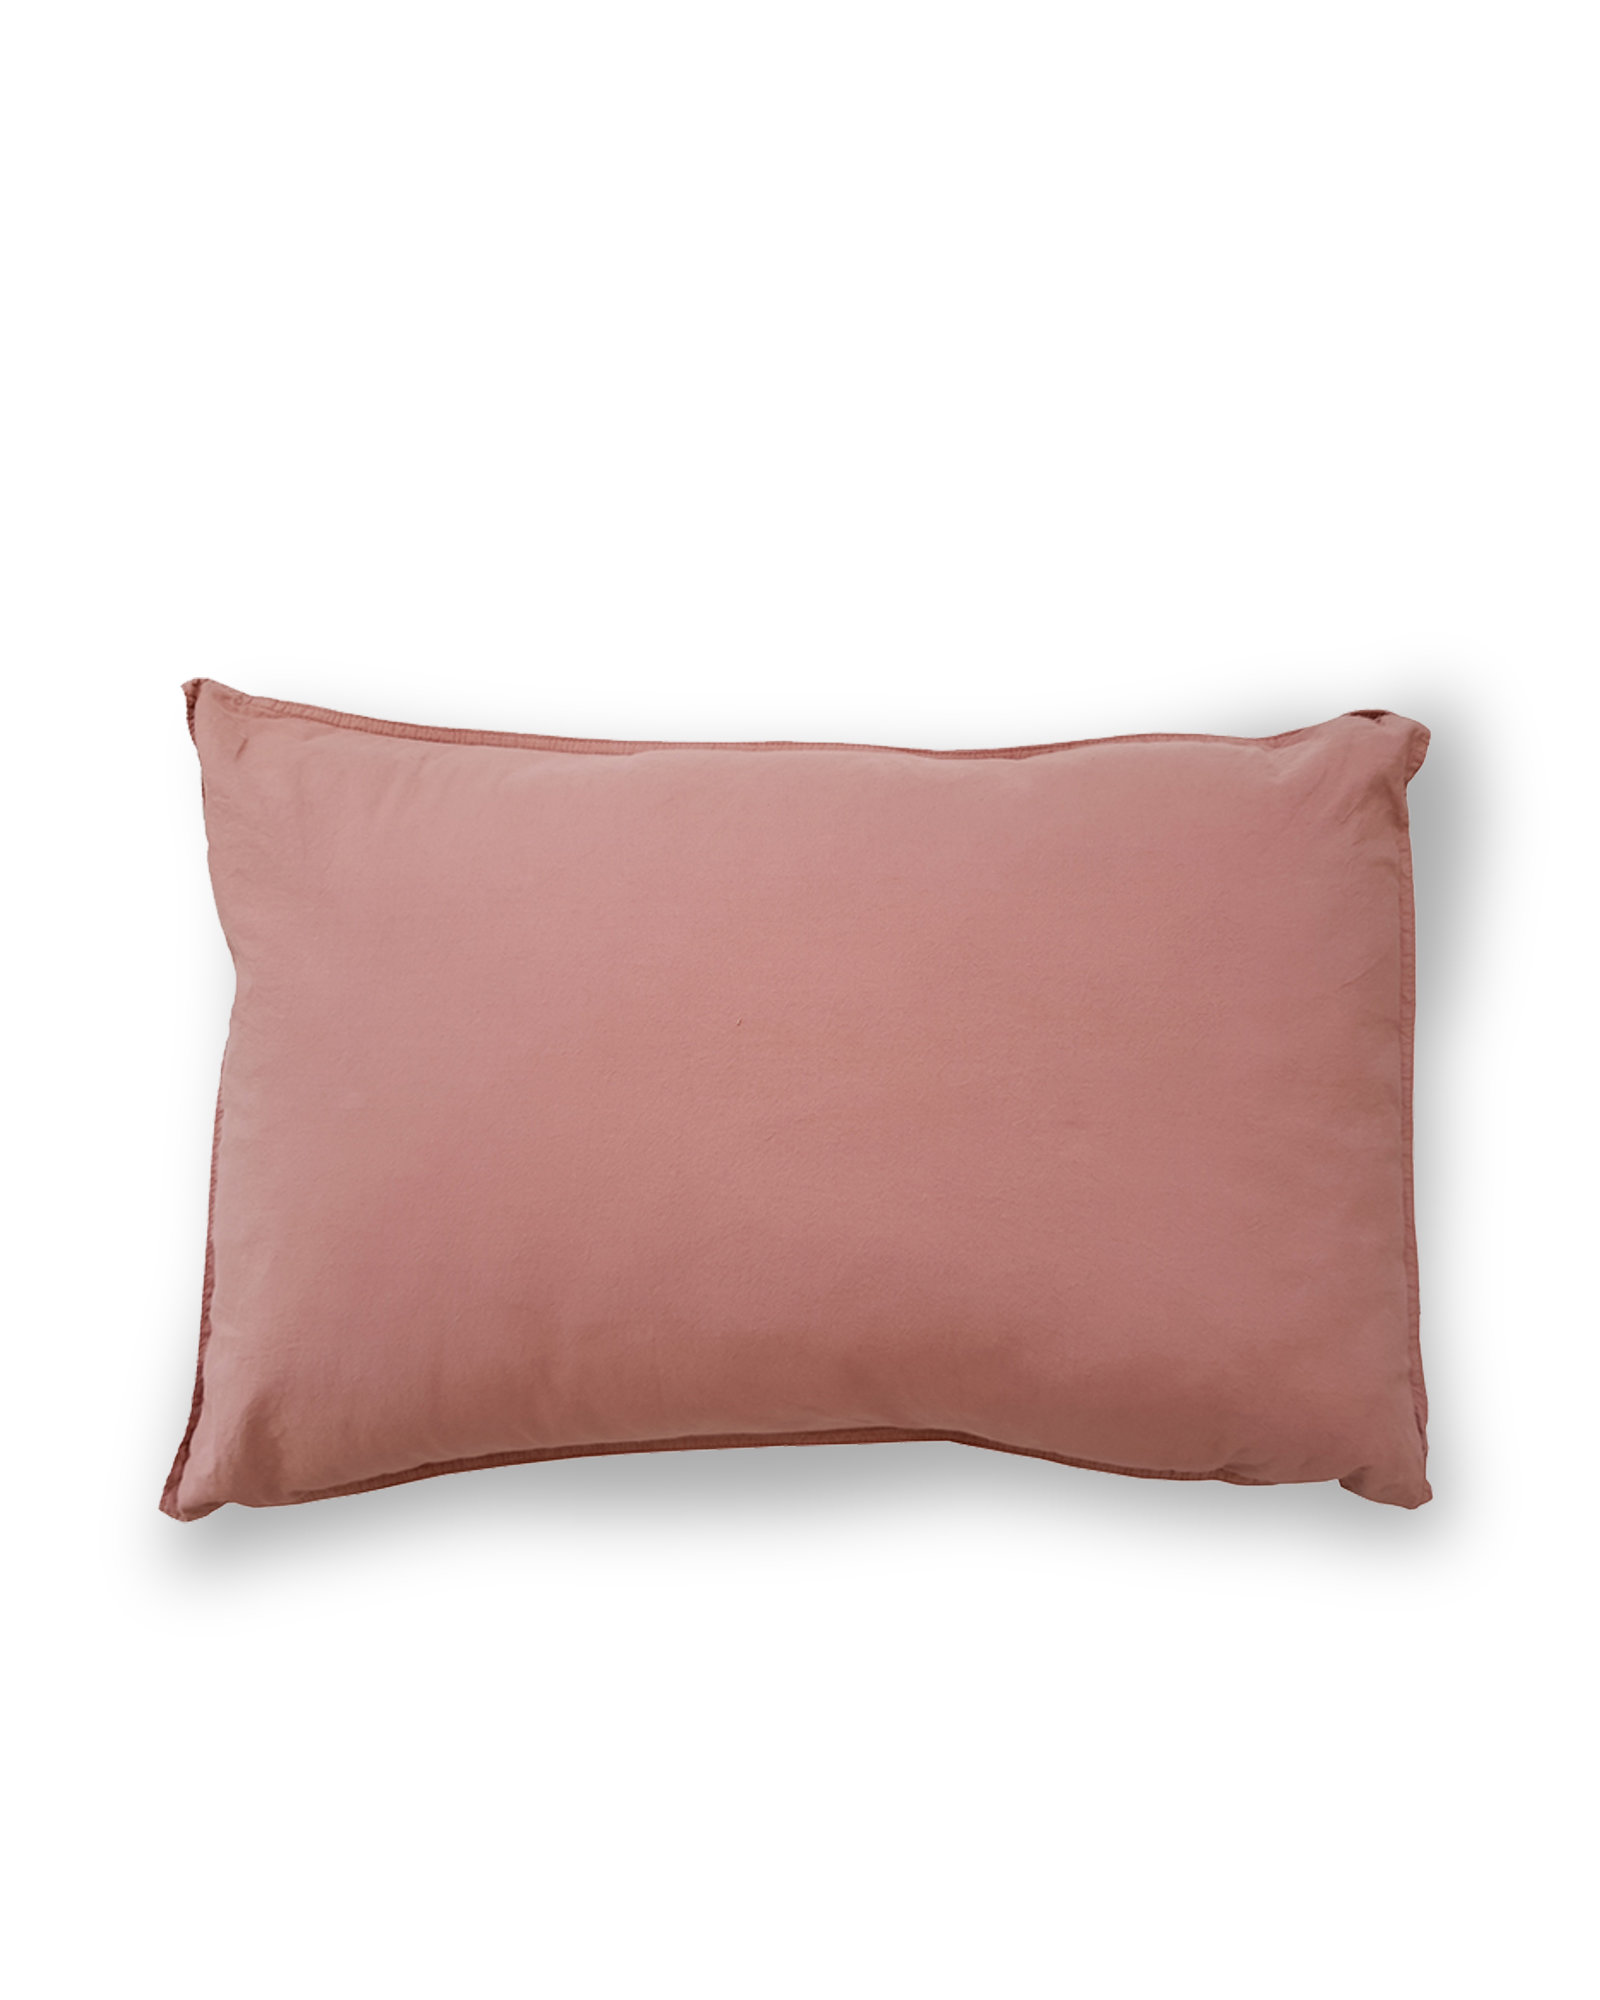 MARIE-MARIE - Coussin VINTAGE COTTON Rosewood - 40x60 cm - Rosewood